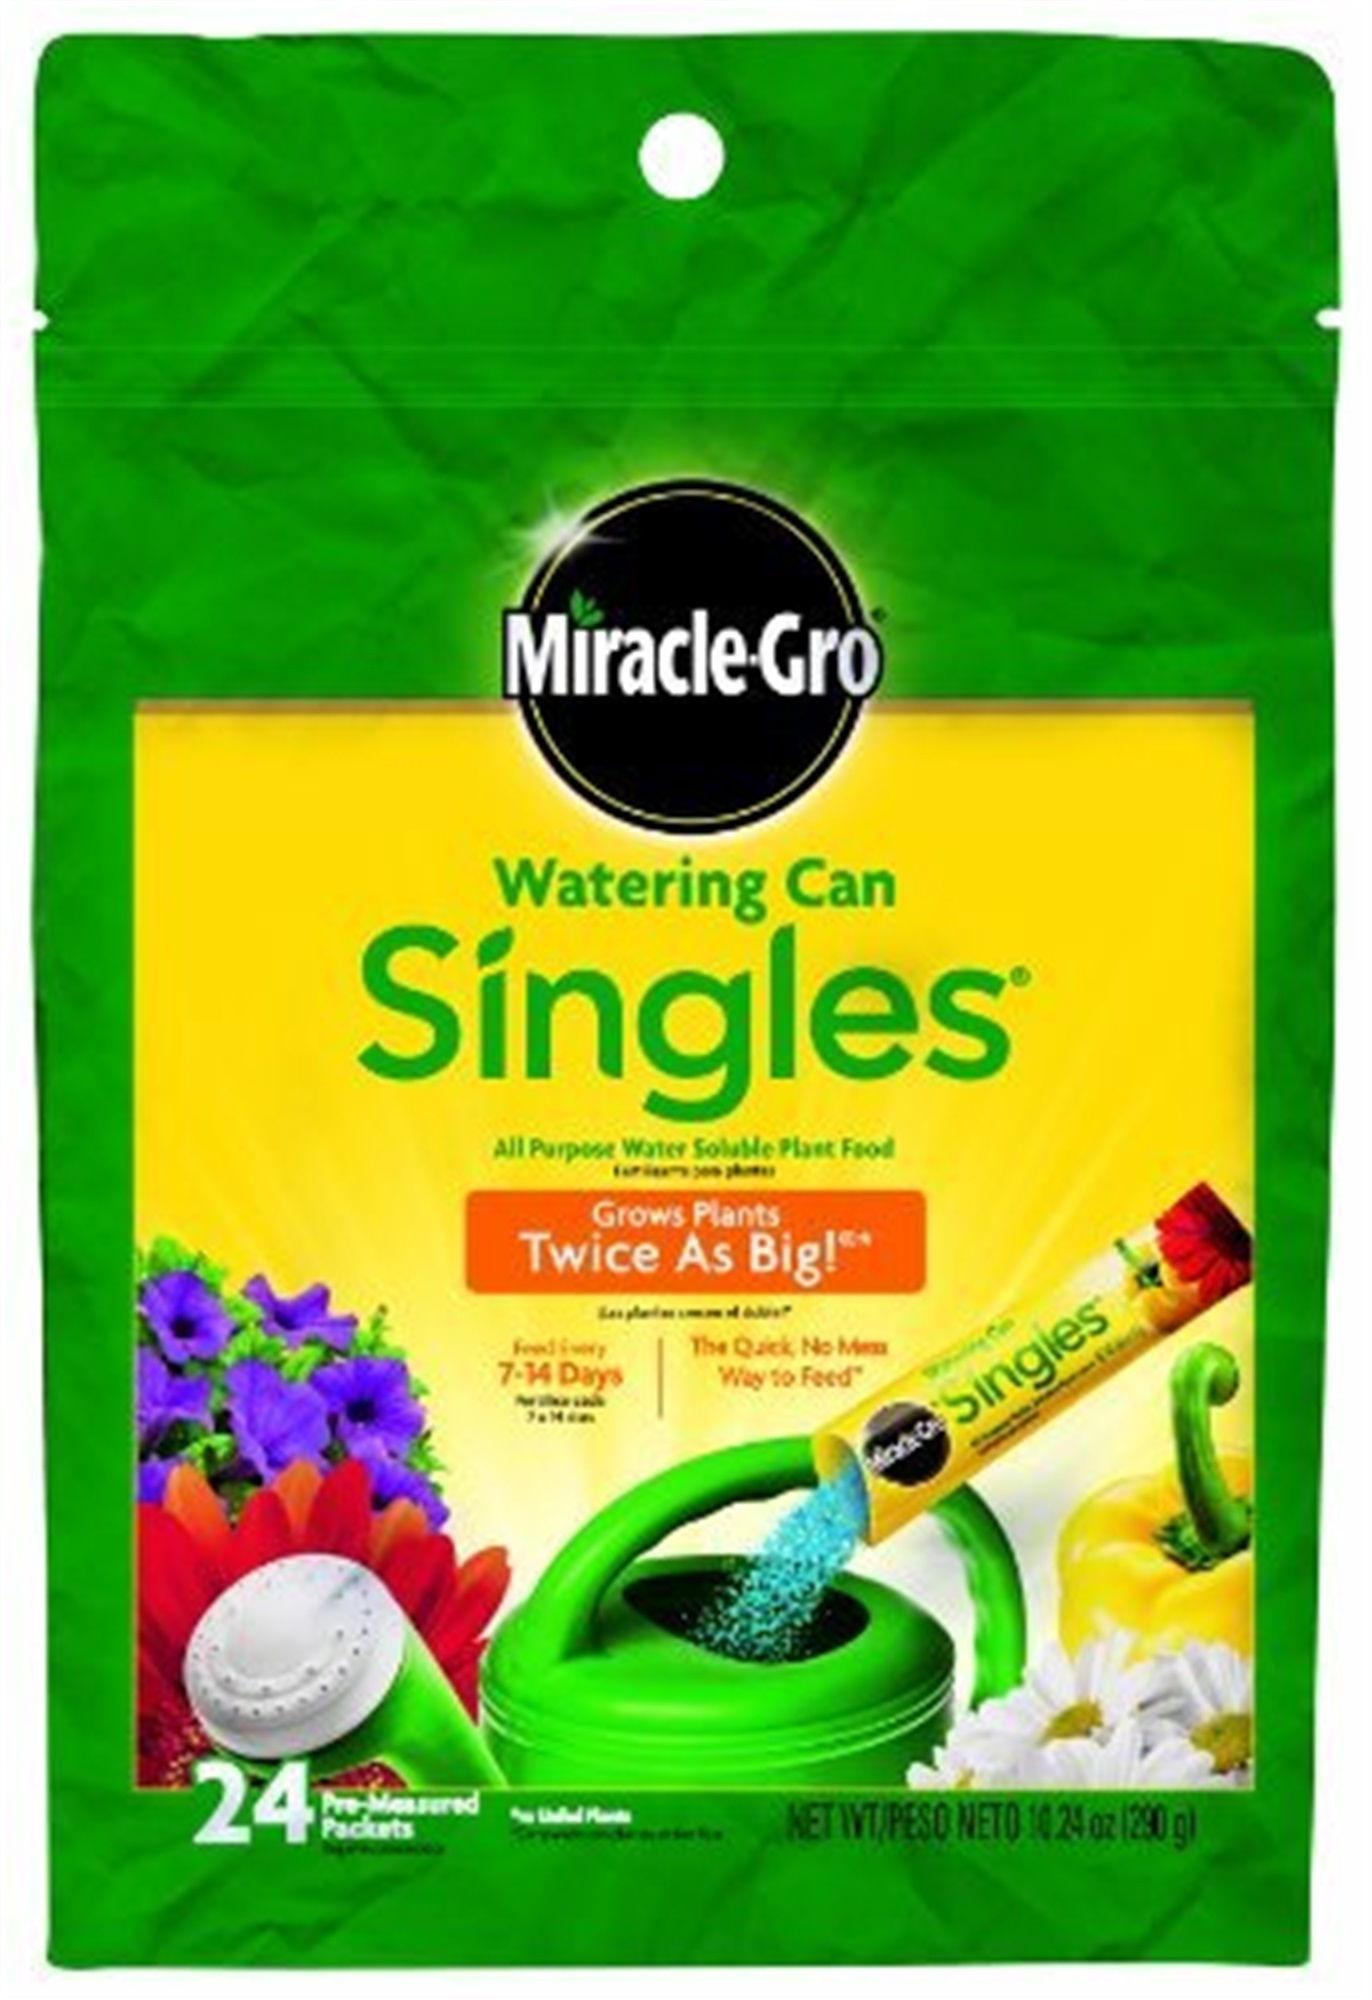 Miracle-Gro Watering Can Singles All Purpose Water Soluble Plant Food, 24 Singles - image 1 of 8